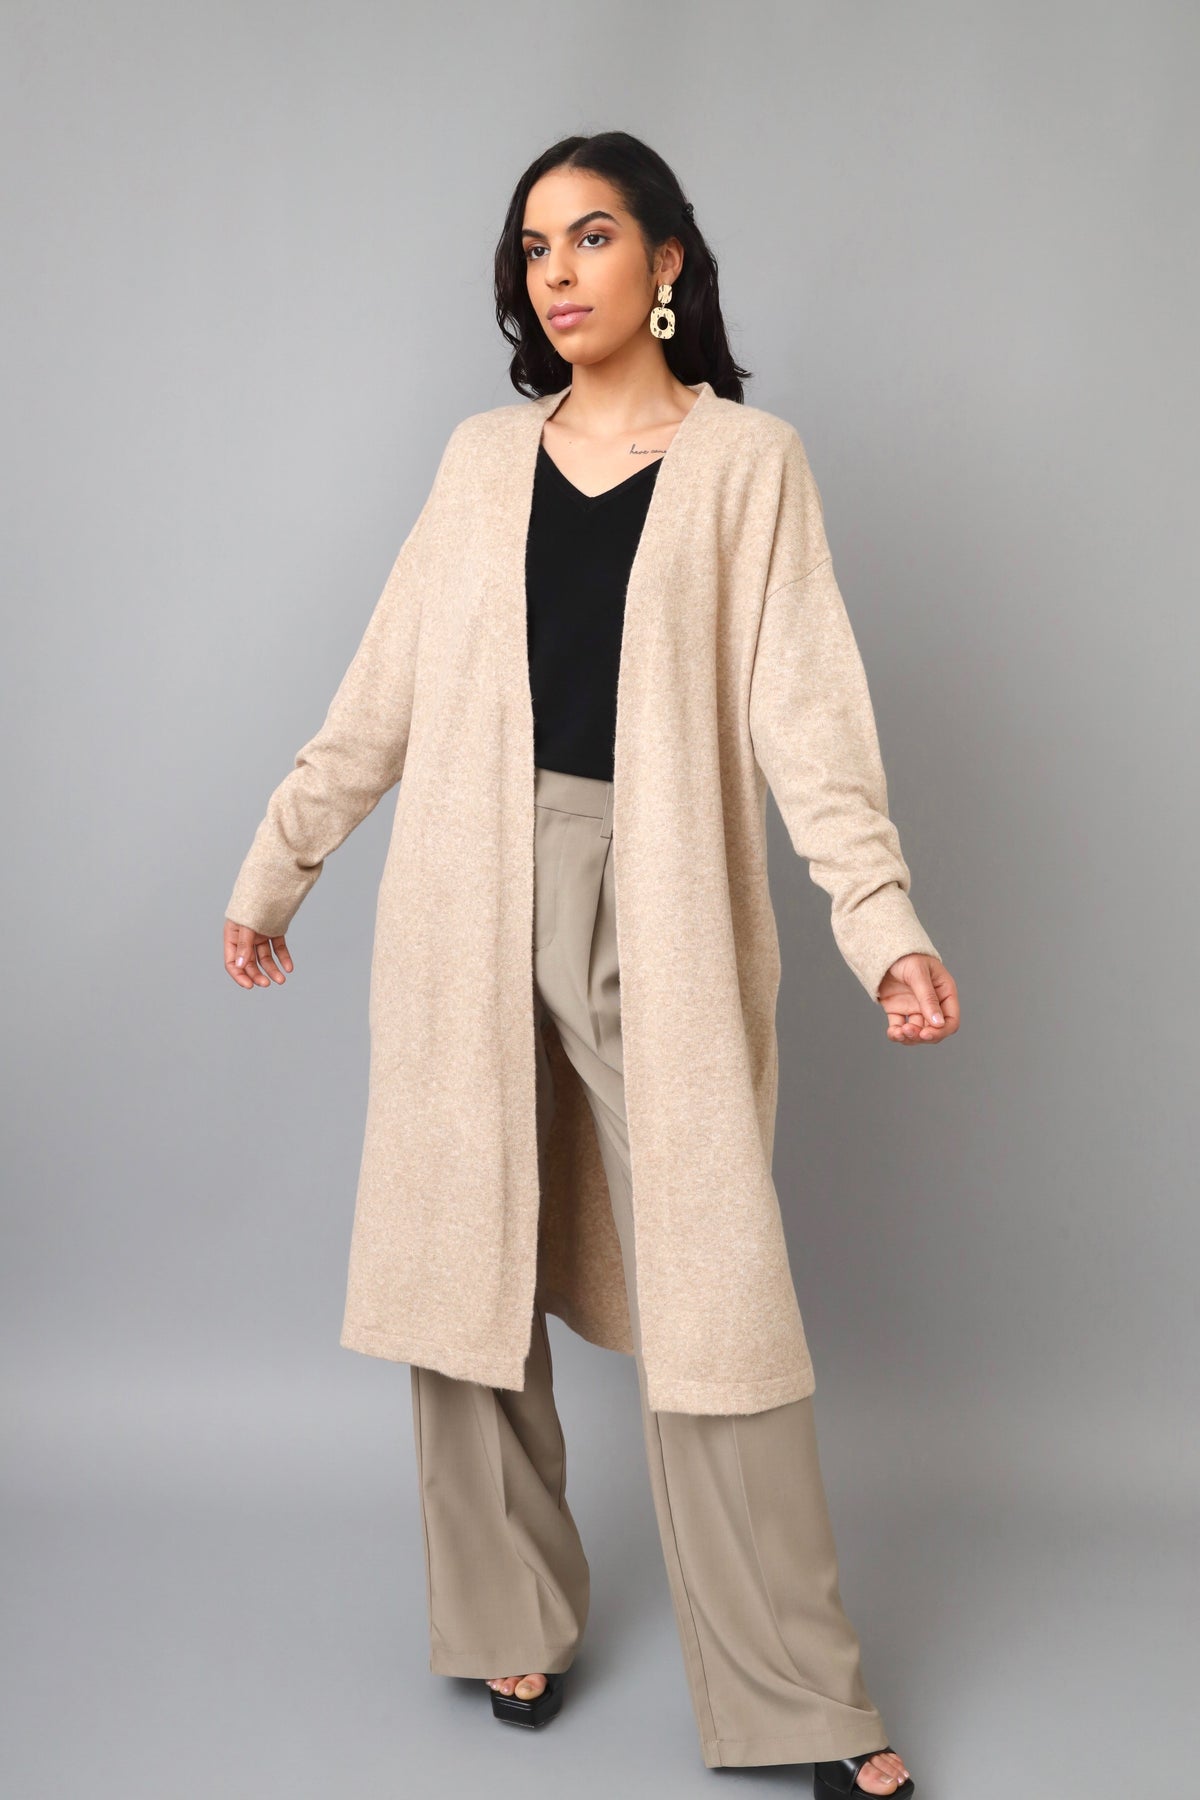 Cozy You Taupe Long Cardigan Sweater